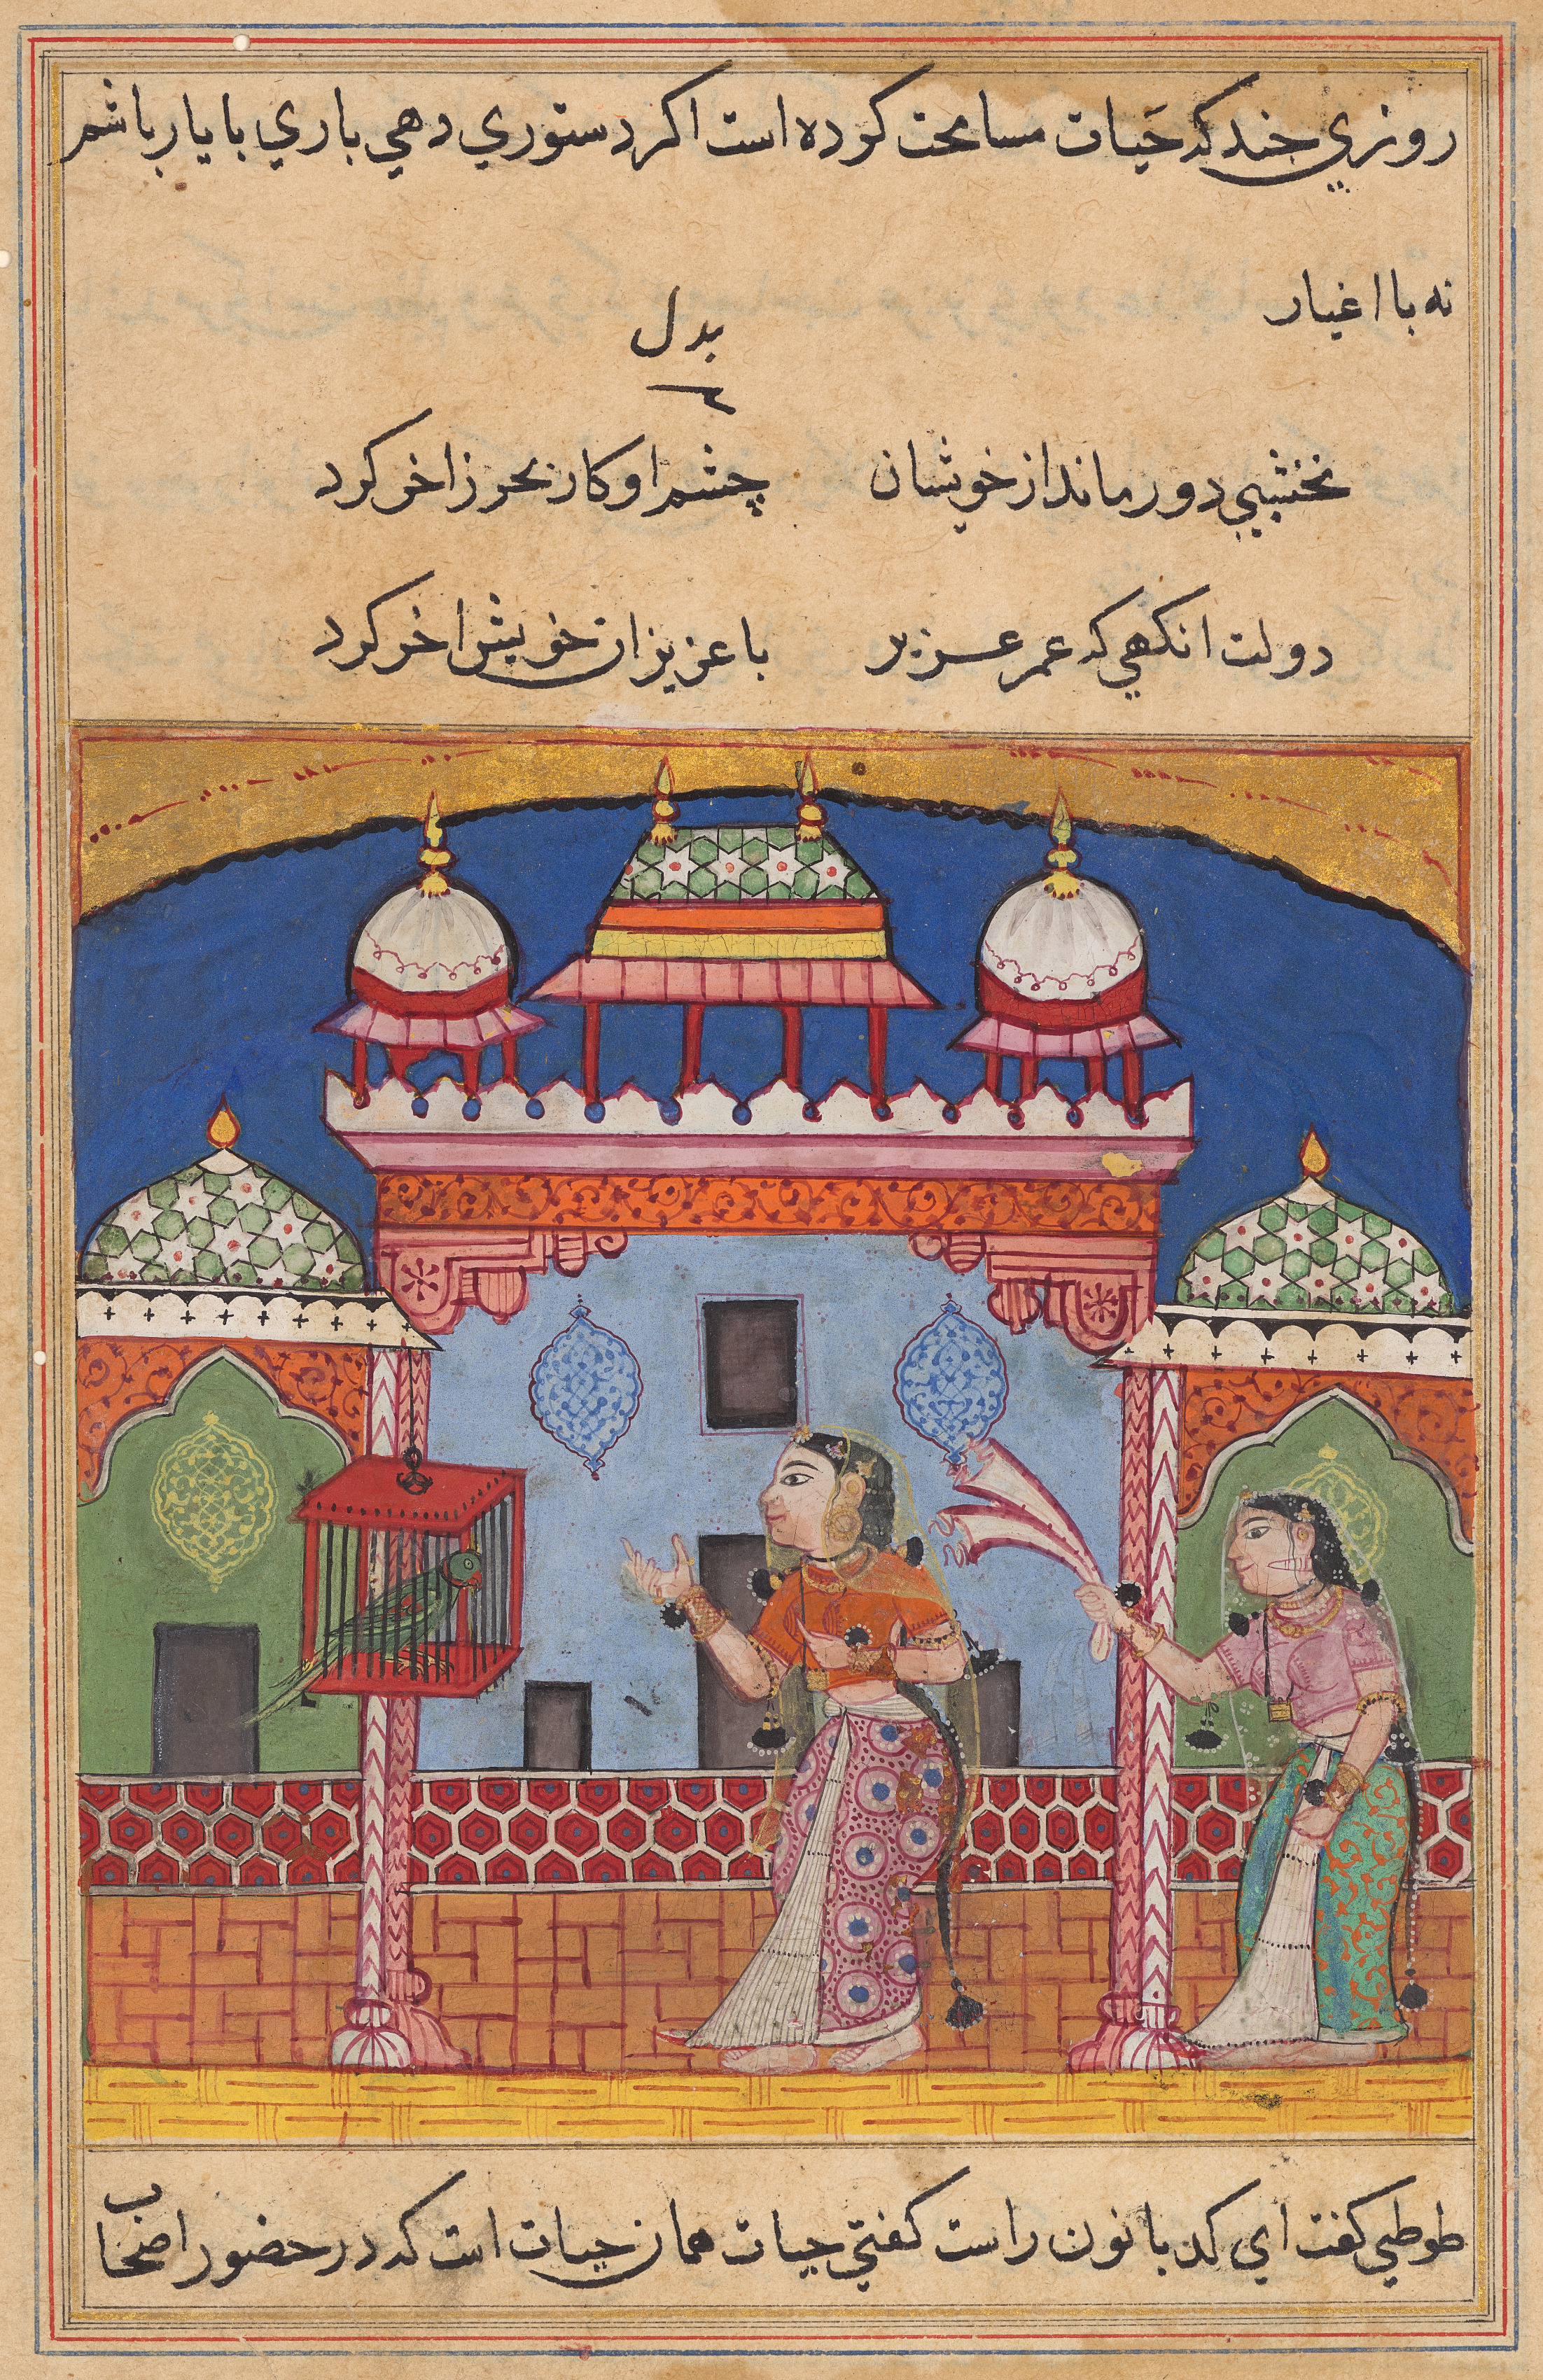 The Parrot Addresses Khujasta at the Beginning of the Twenty-second Night, from a Tuti-nama (Tales of a Parrot)